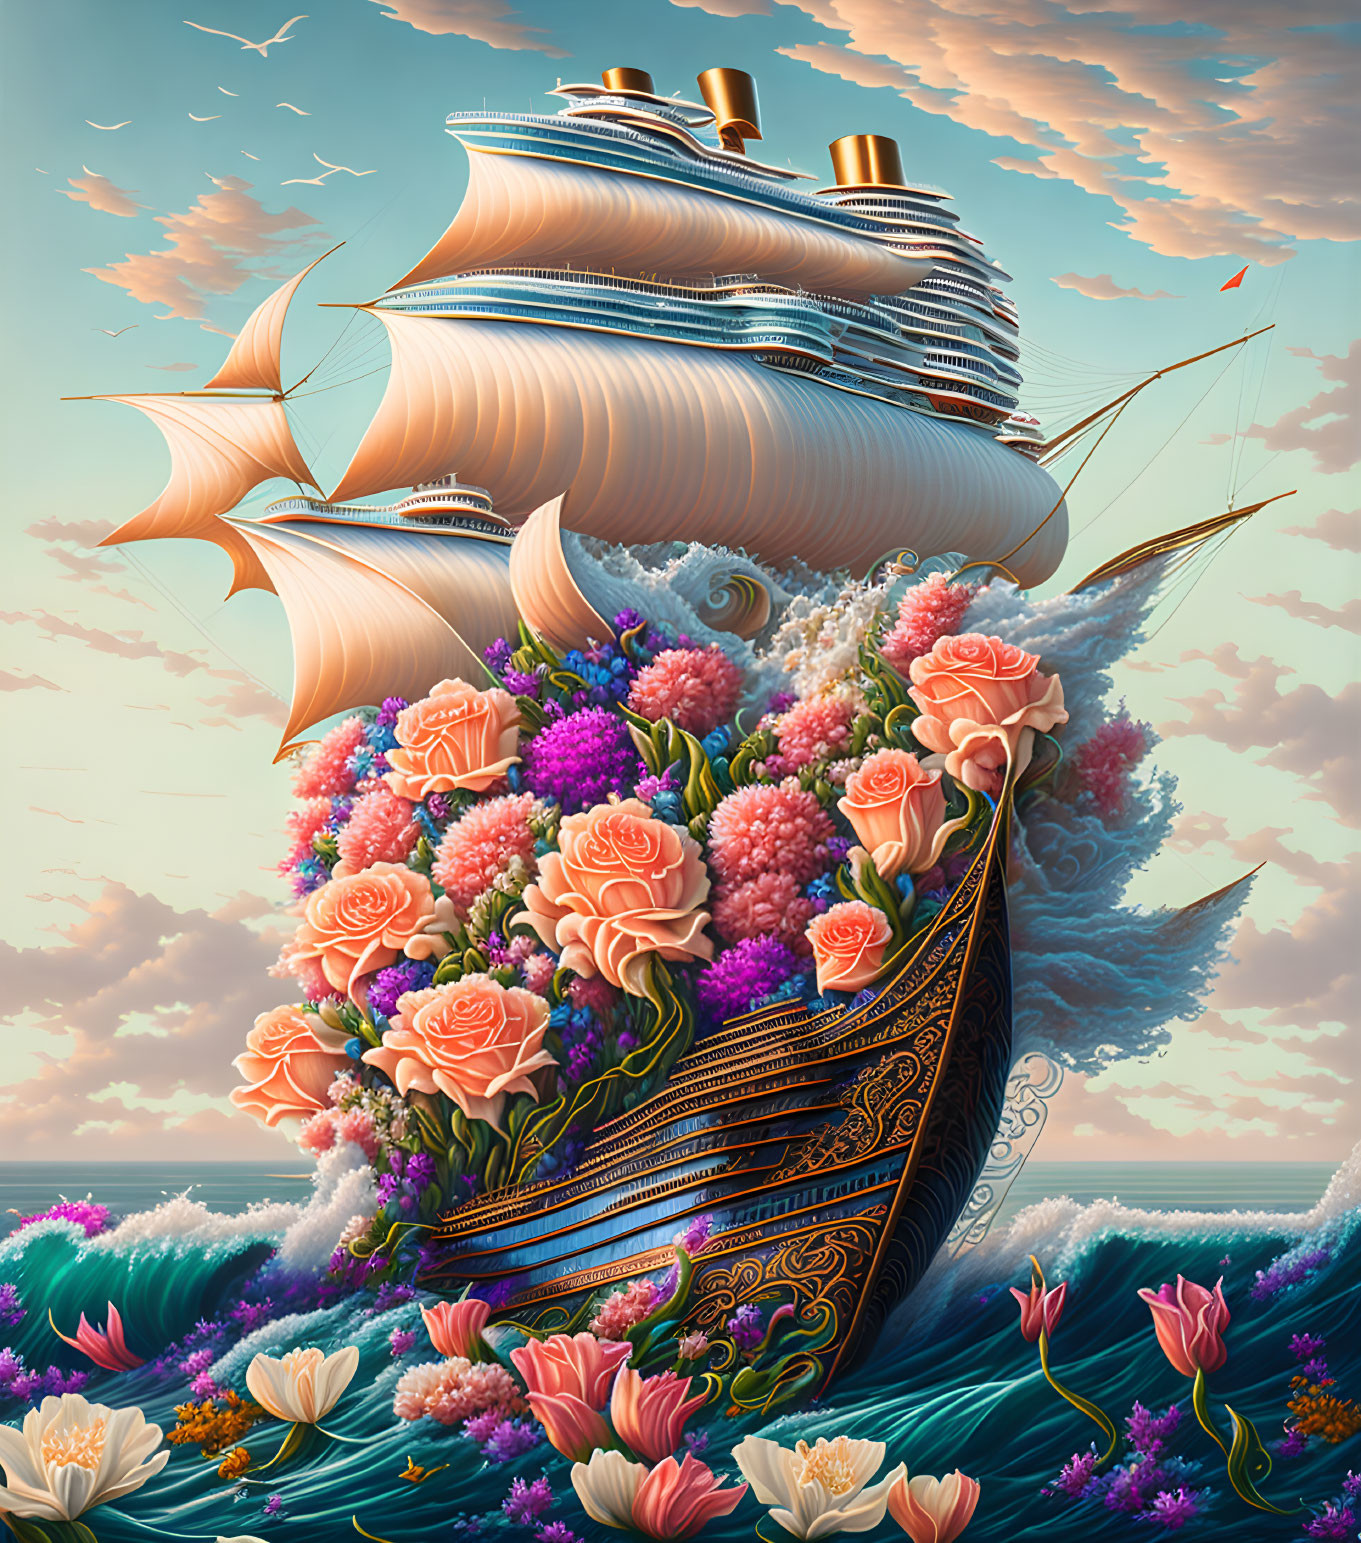 Illustration of ship with white sails in flower-filled sea